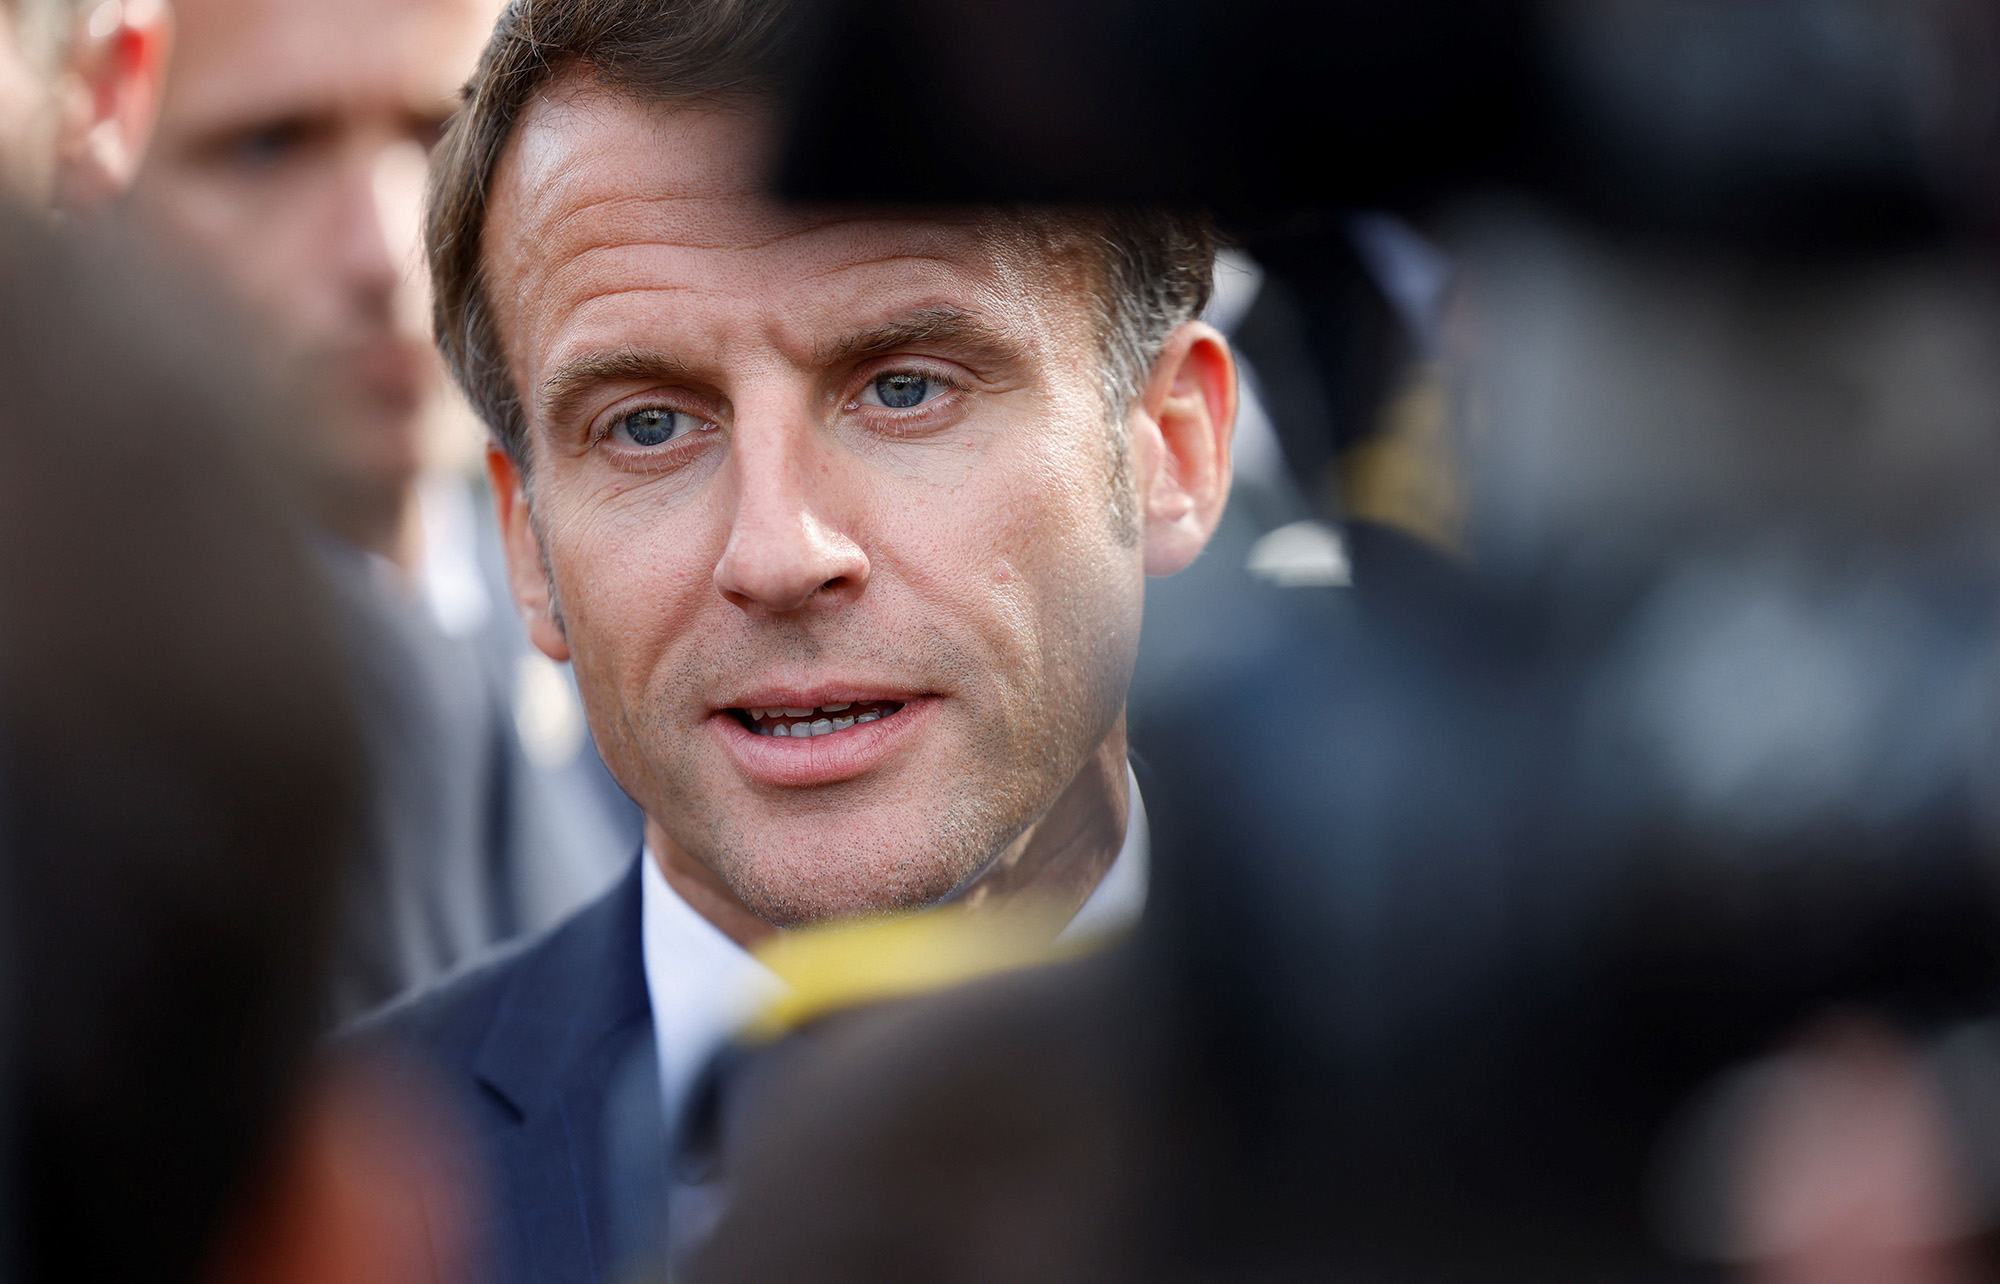 French President Emmanuel Macron speaks to the press during a visit in the city of Craon, northwestern France, on October 10.